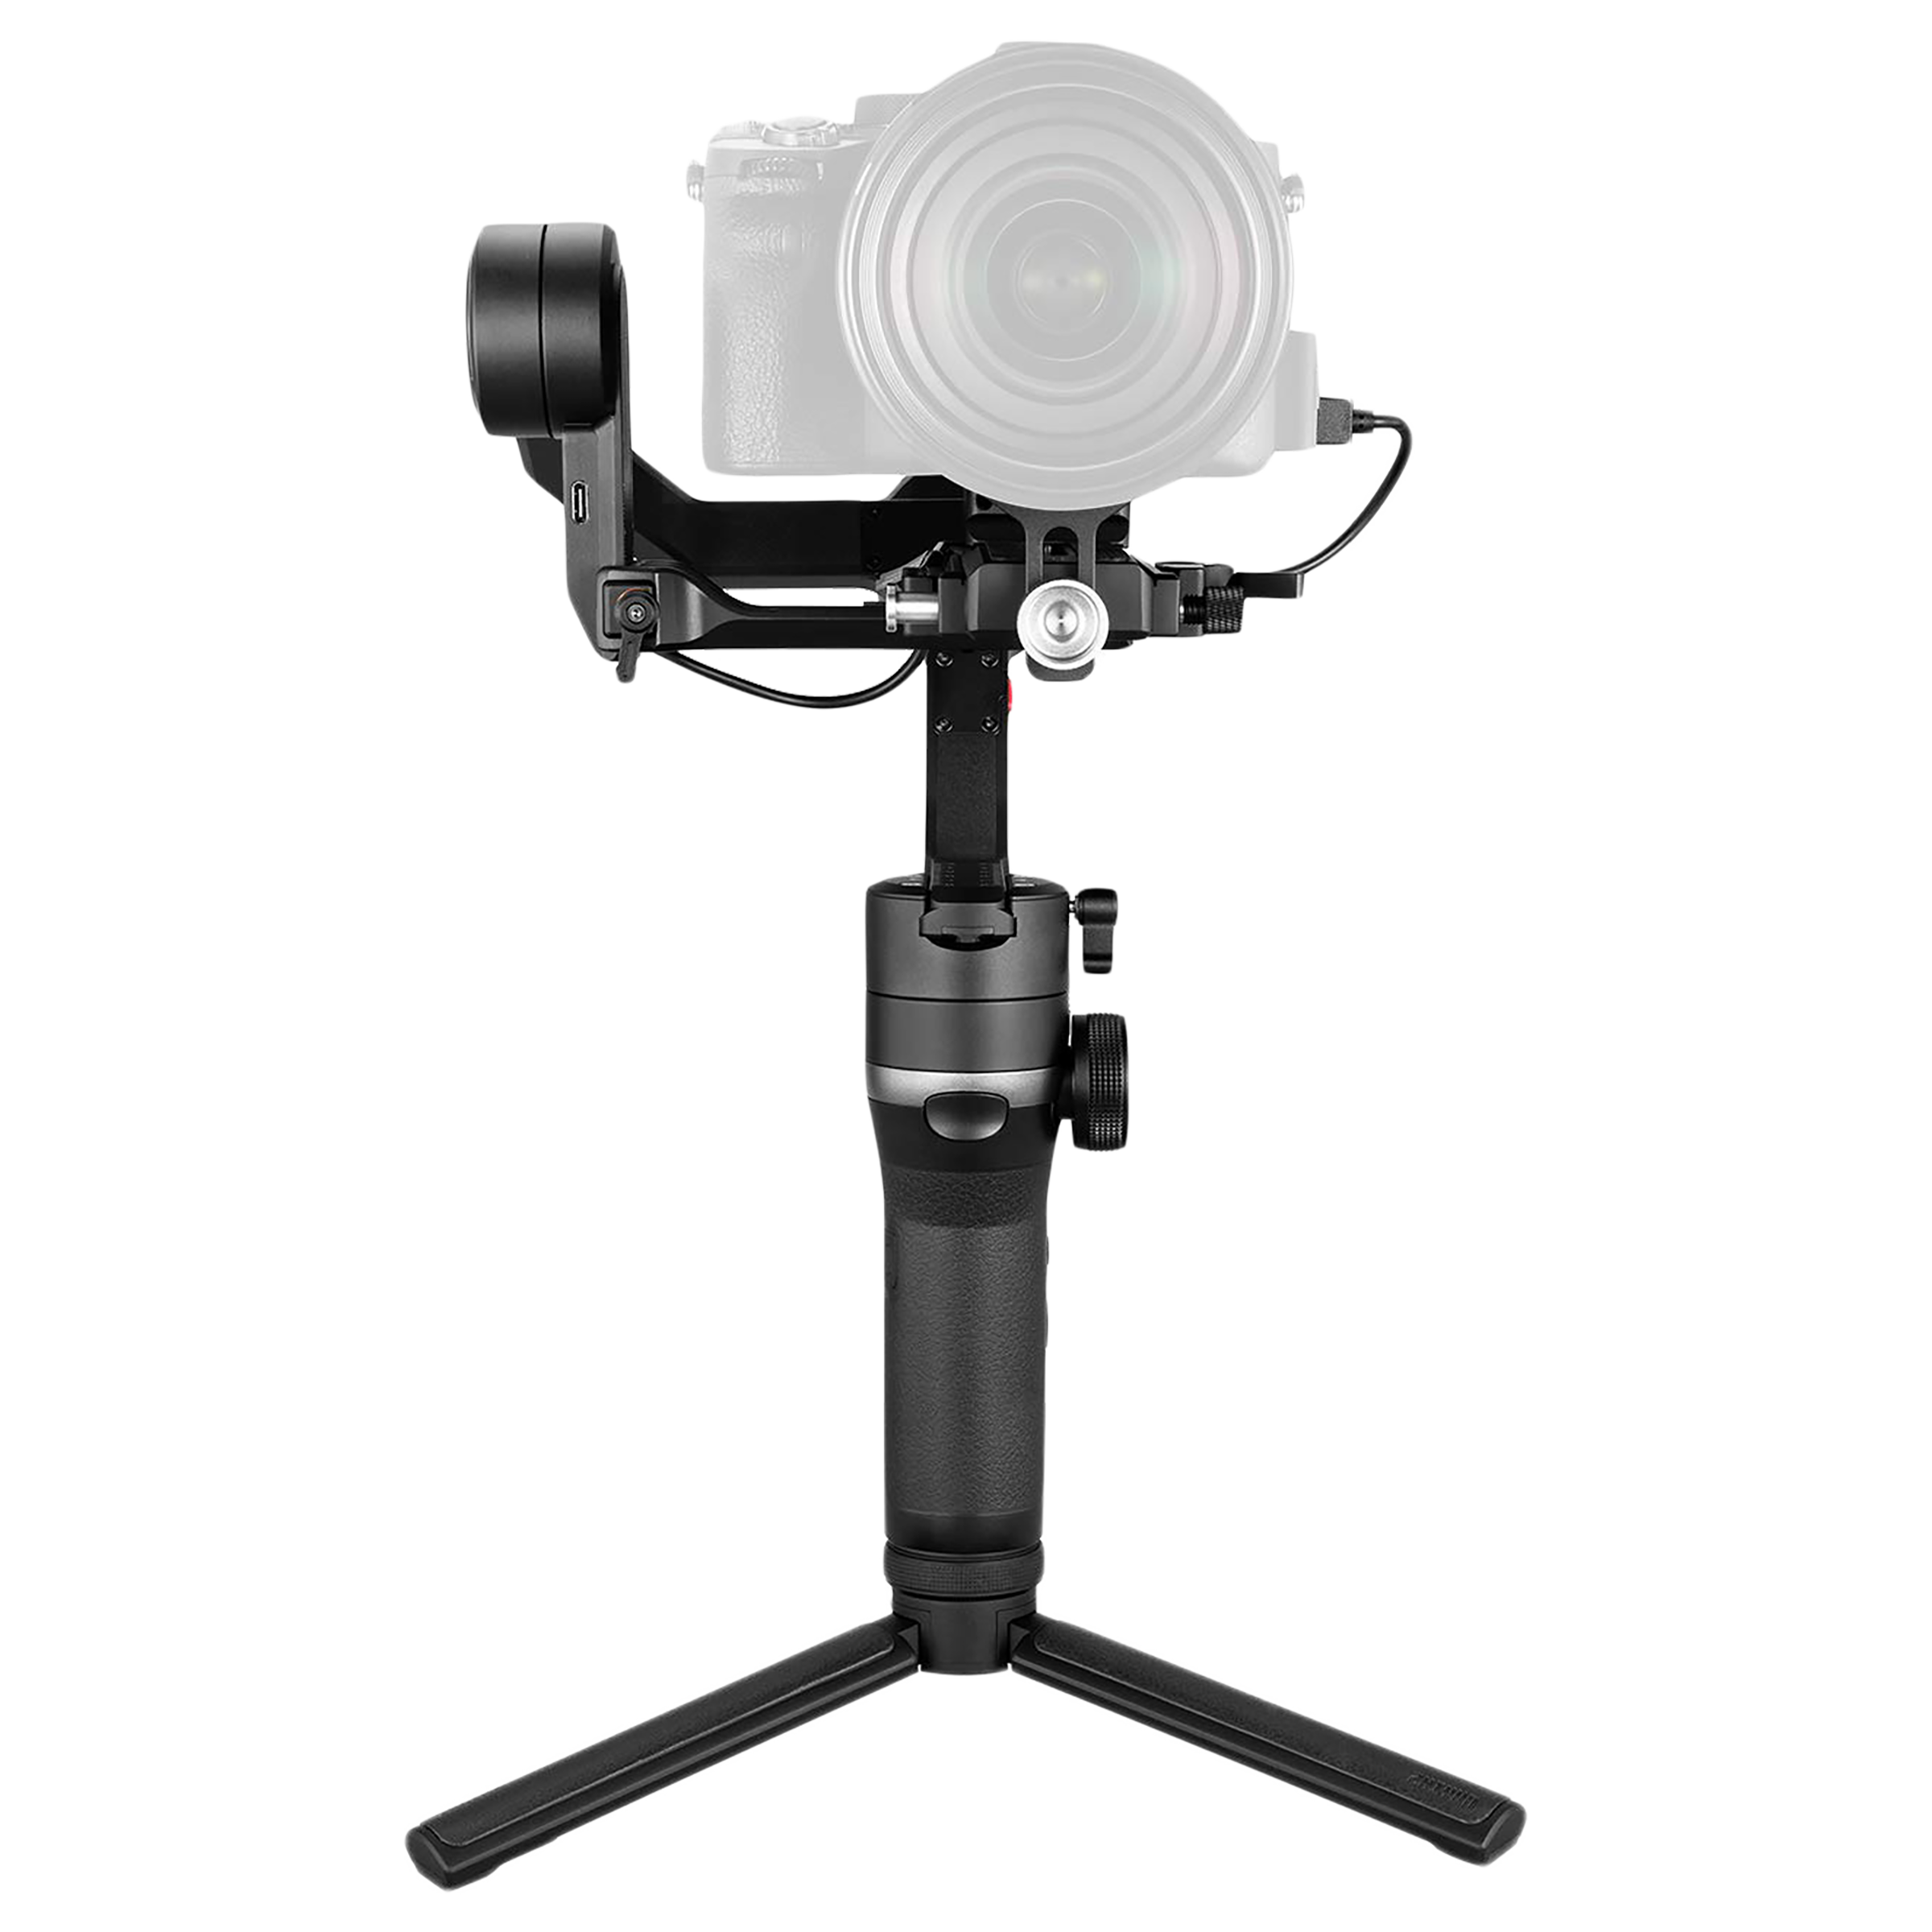 Zhiyun Weebill S 3-Axis Gimbal for Camera (314 Degree Controlled Rotation, Black)